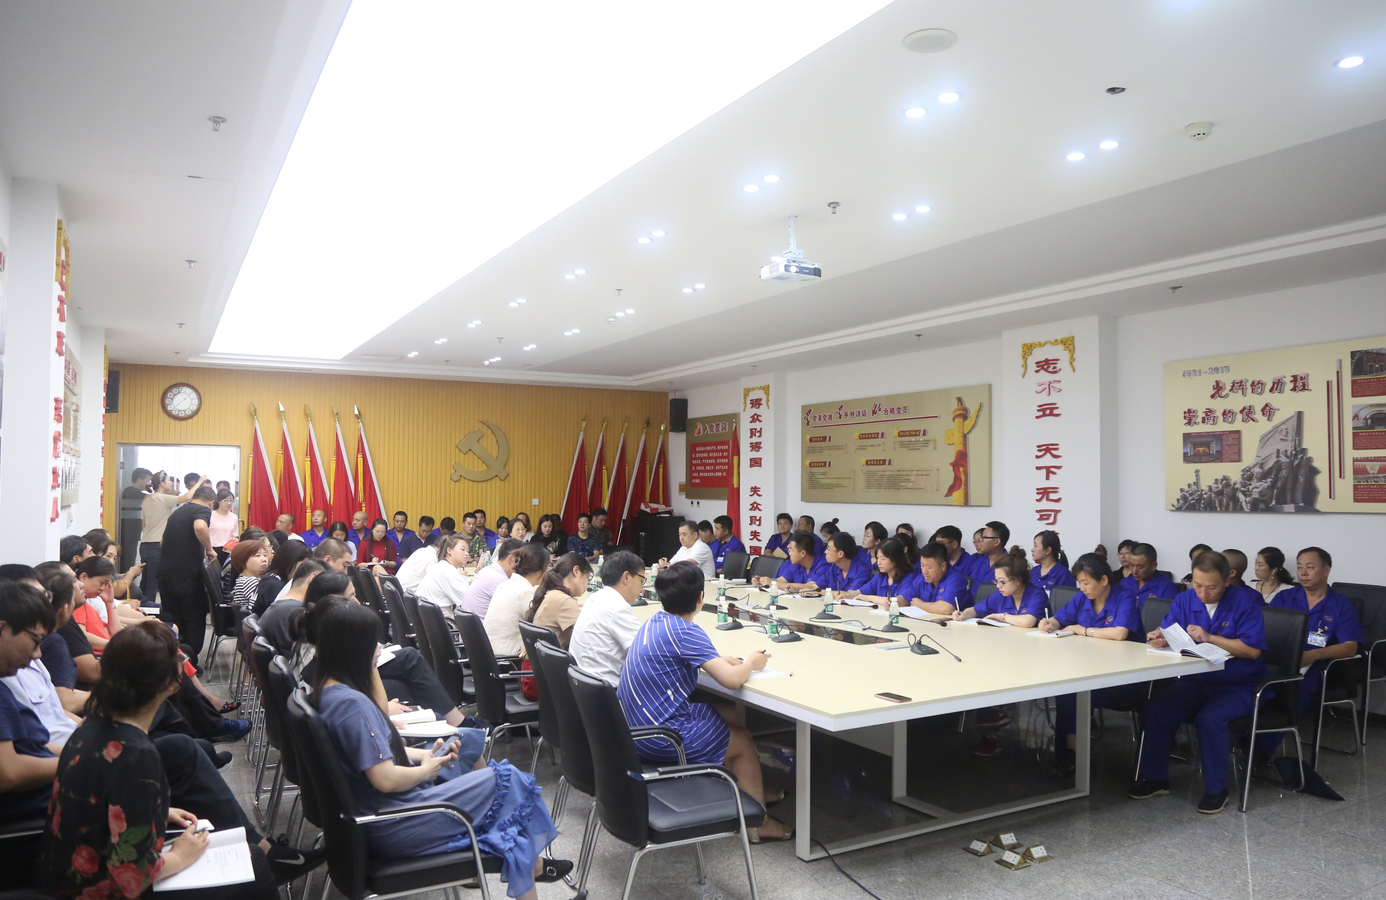 Party members of Lianshi Chemical participated in the party class on the theme of "Don't forget the original heart, keep the mission in mind" in the High-tech Park